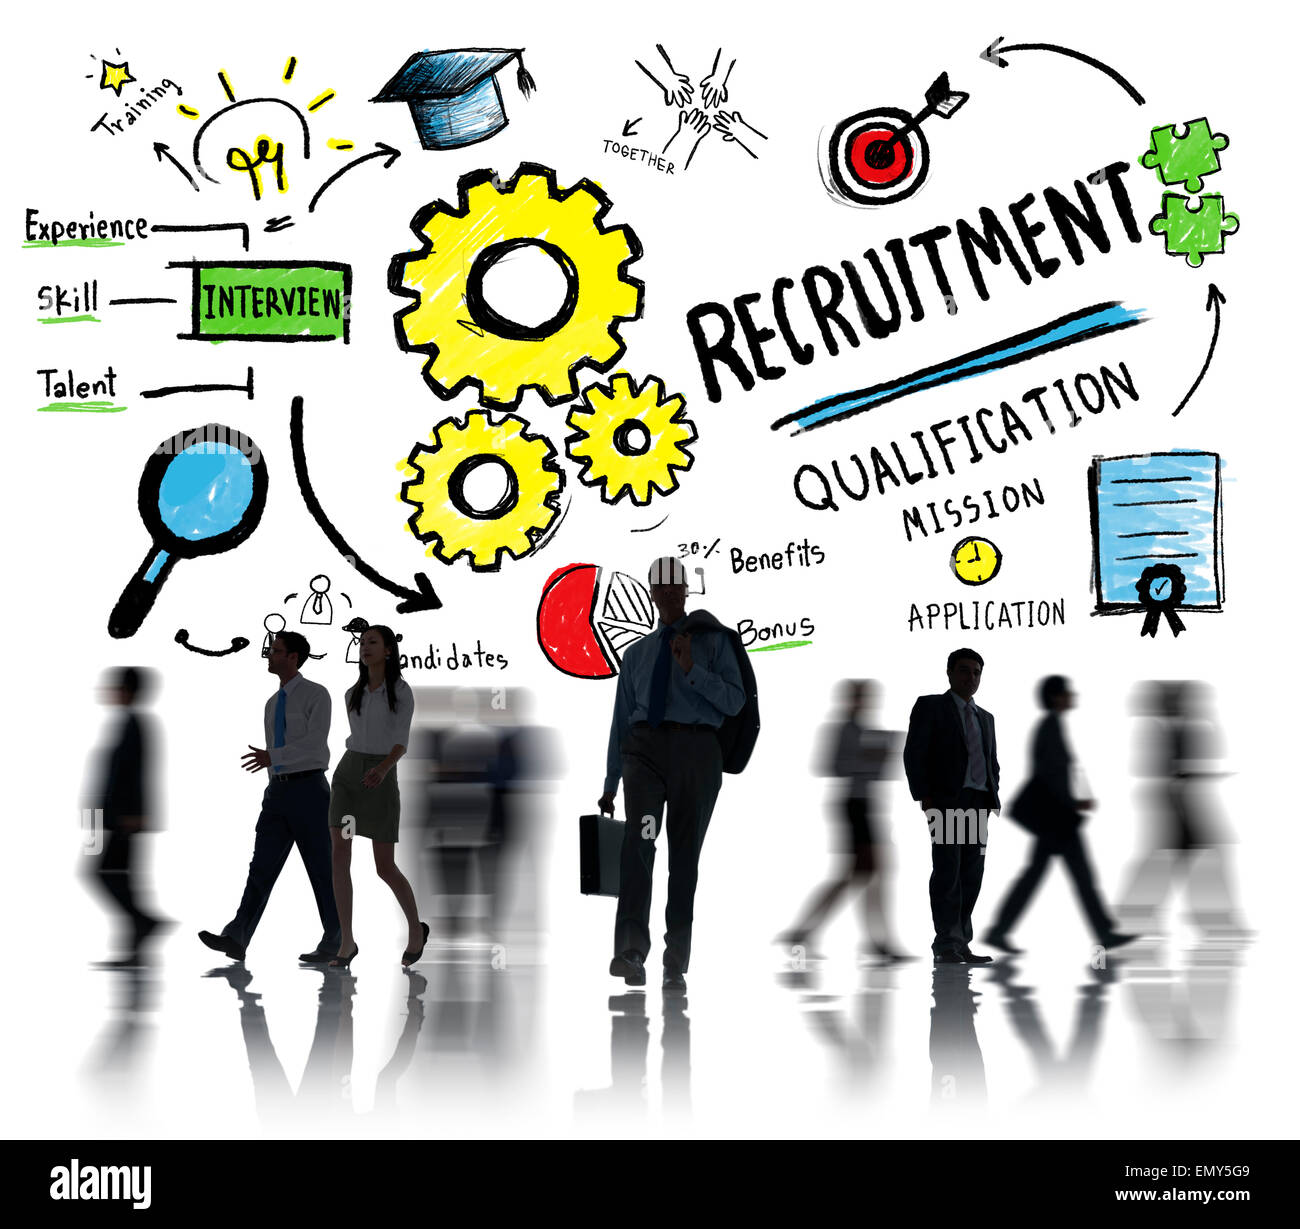 Business People Walking Recruitment Qualification Concept Stock Photo